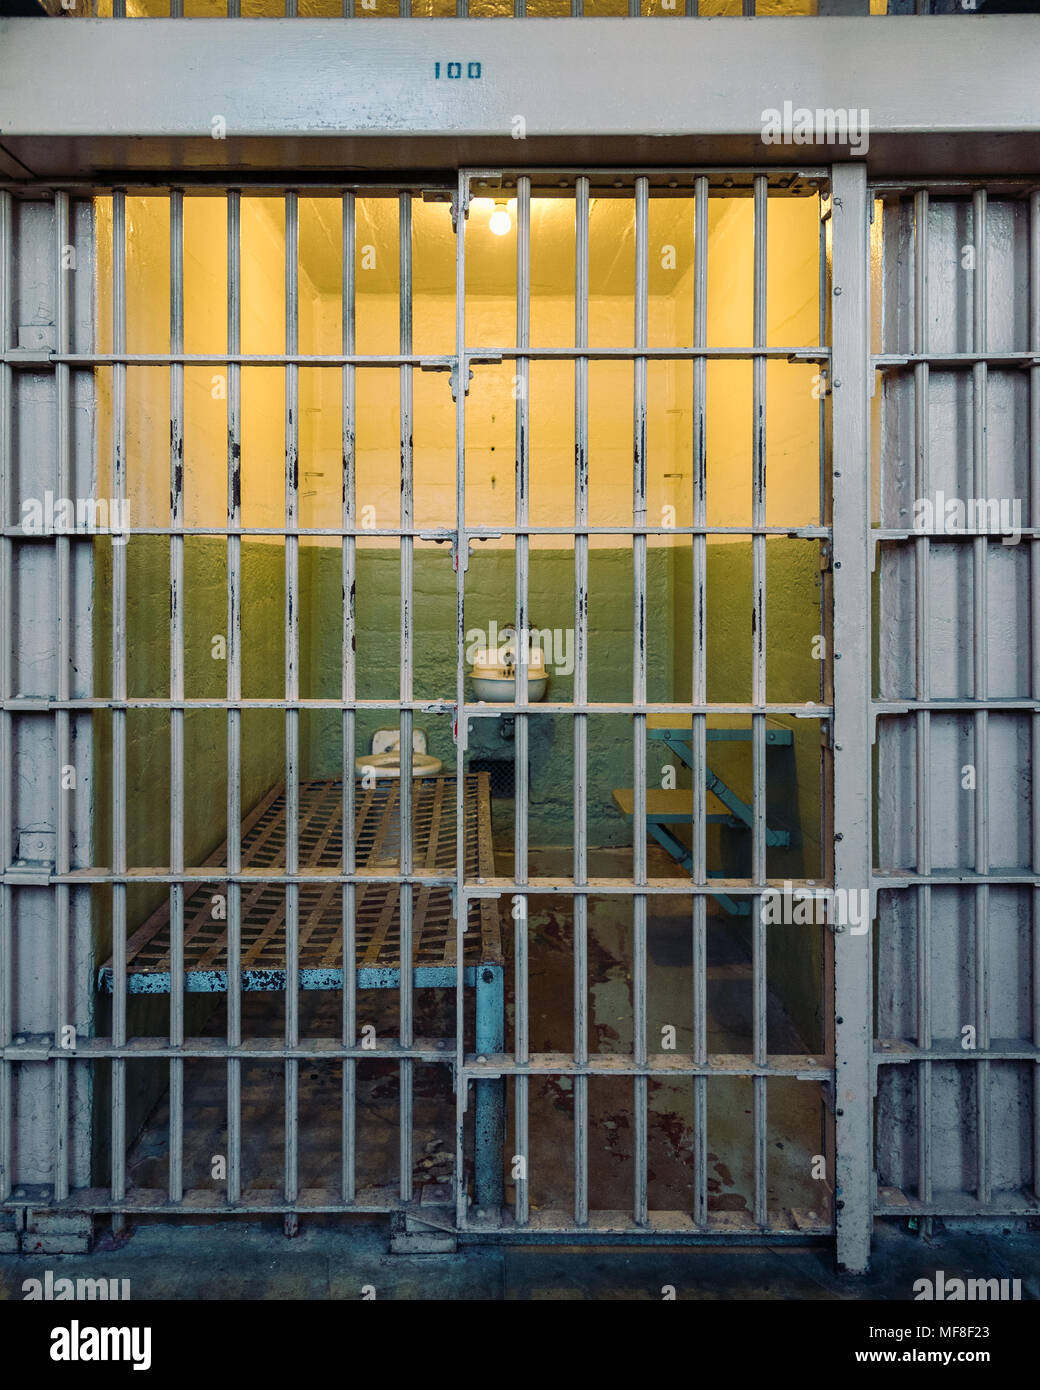 Looking into a prison cell at Alcatraz Stock Photo